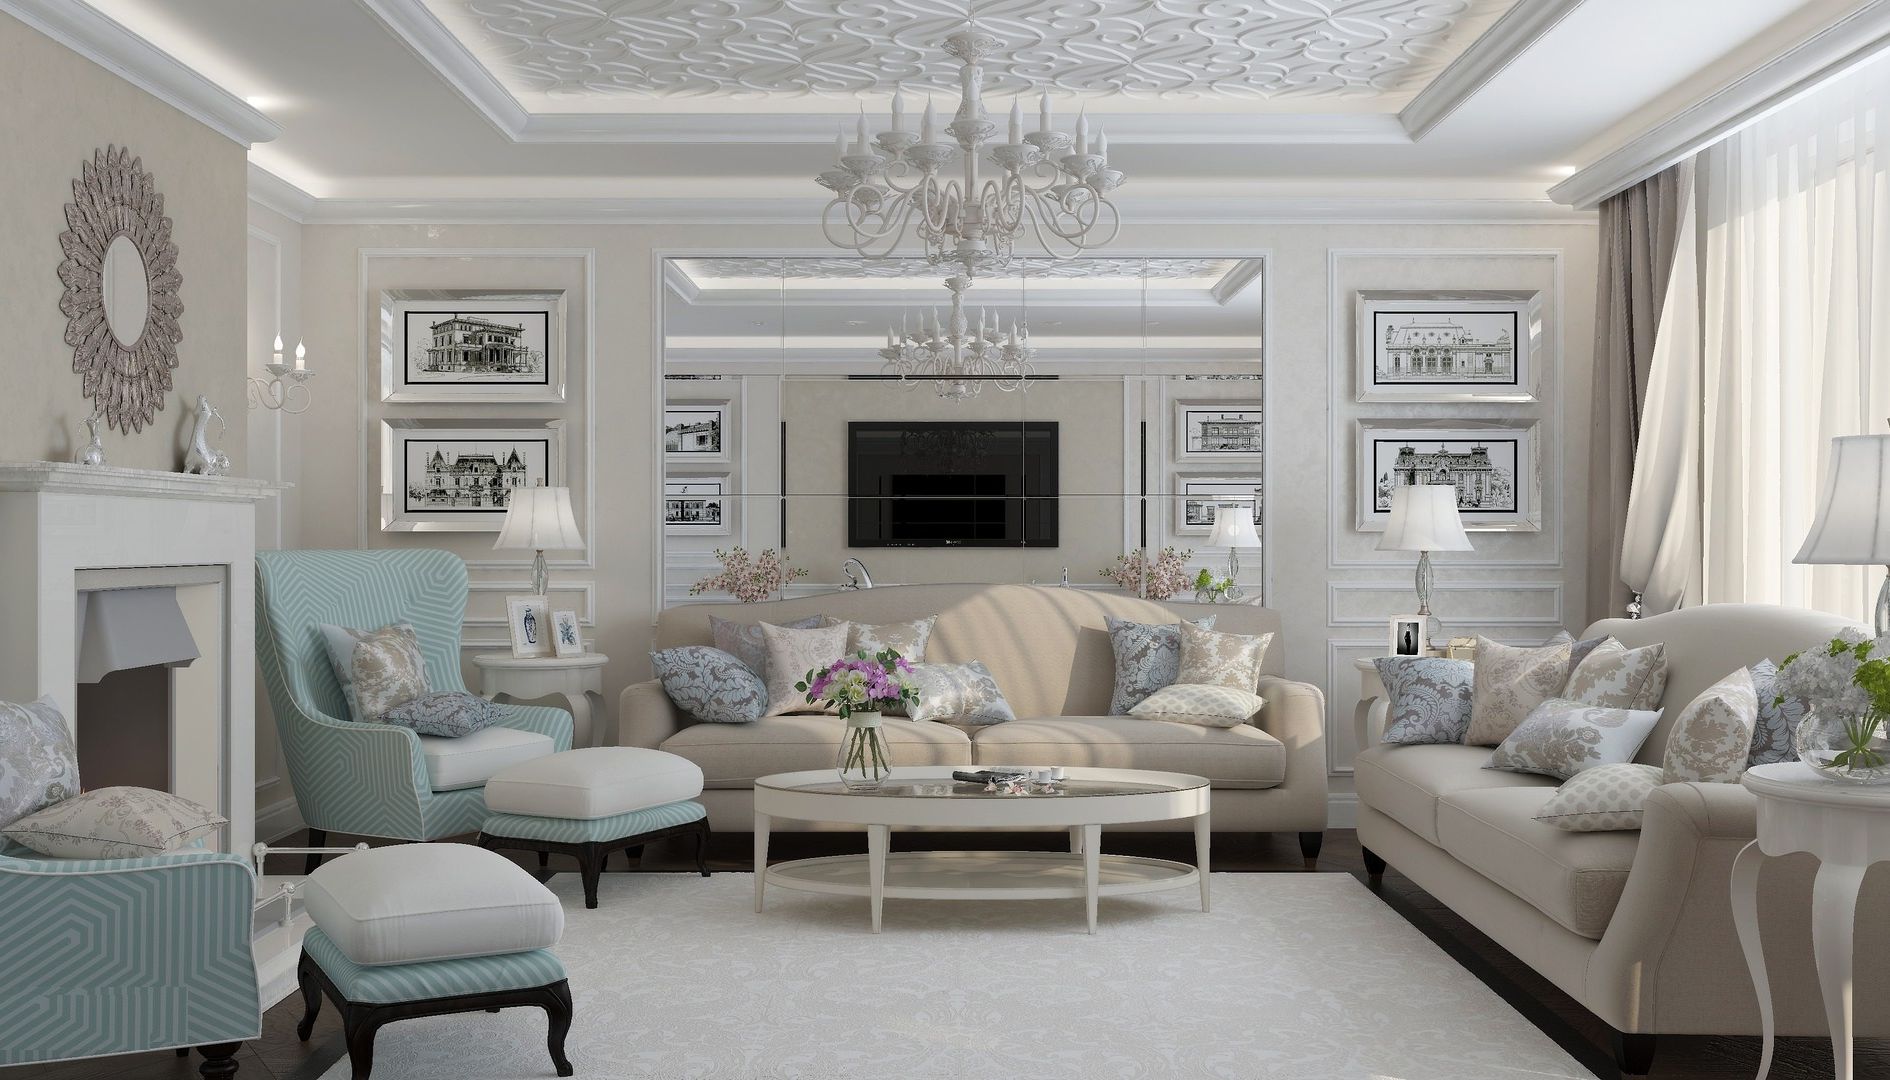 neoclassical style in the interior of the apartment ideas ideas